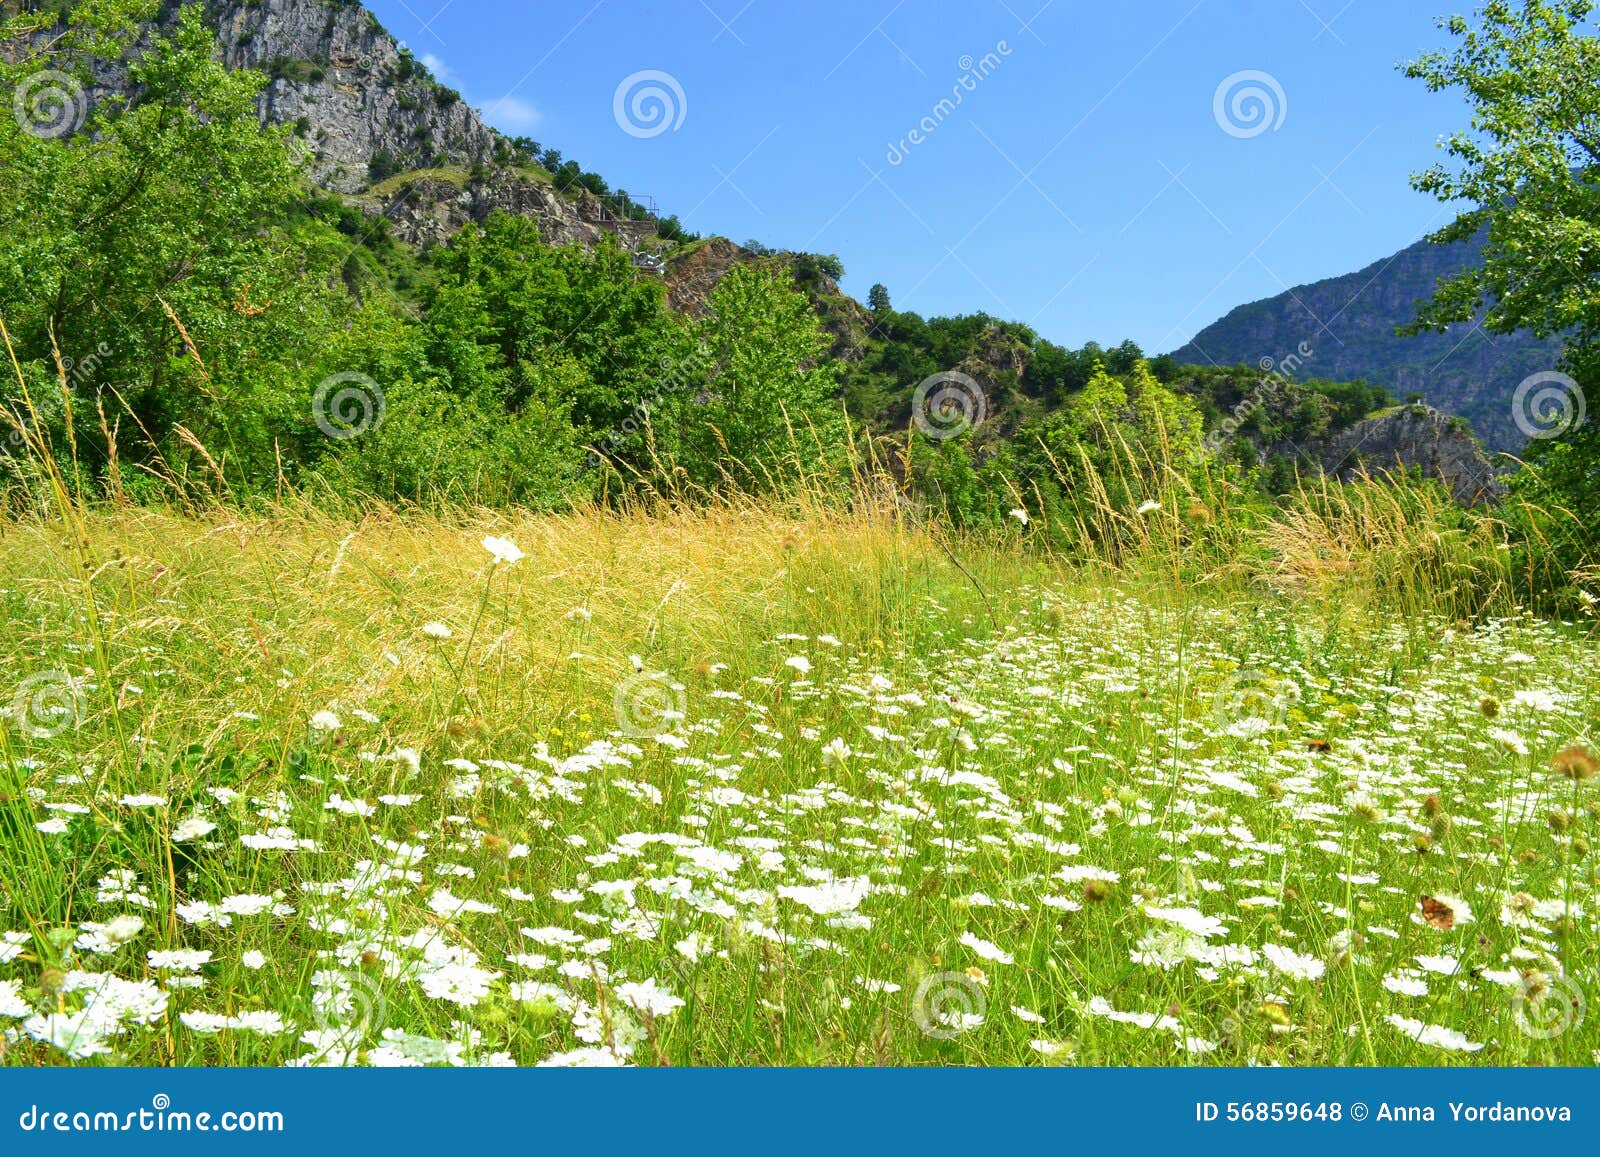 Mountain Meadow White Wildflowers Stock Photo Image Of Relaxation